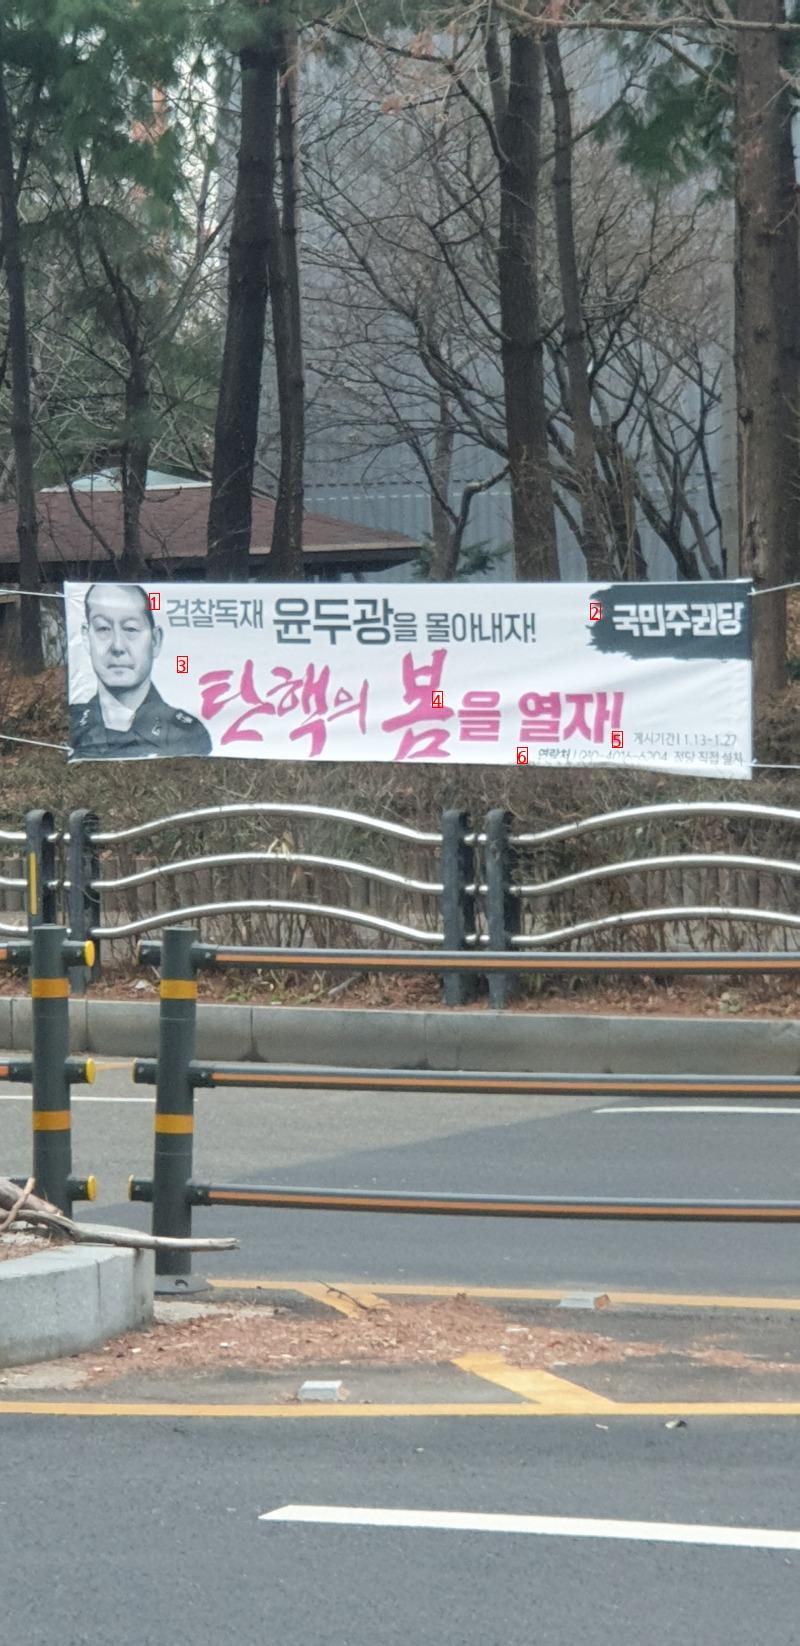 Banners of the National Sovereignty Party hit the jackpot